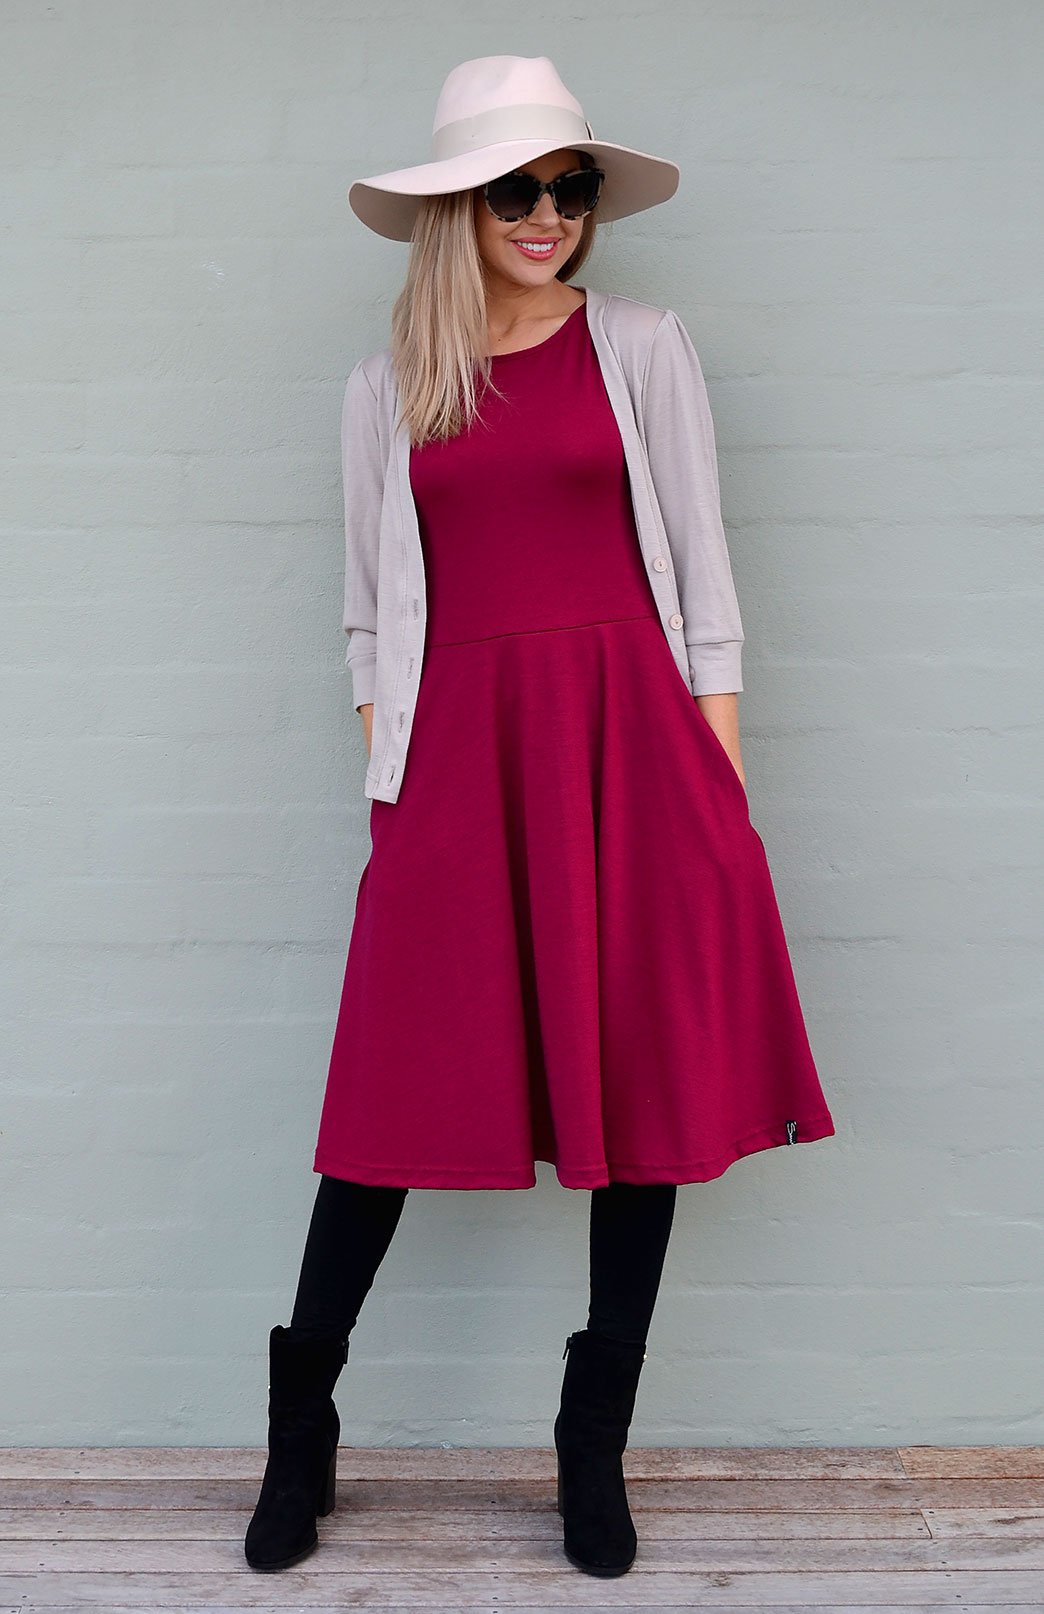 Magenta Women&#39;s Merino Wool Fit and Flare Dress with 3/4 Sleeves
